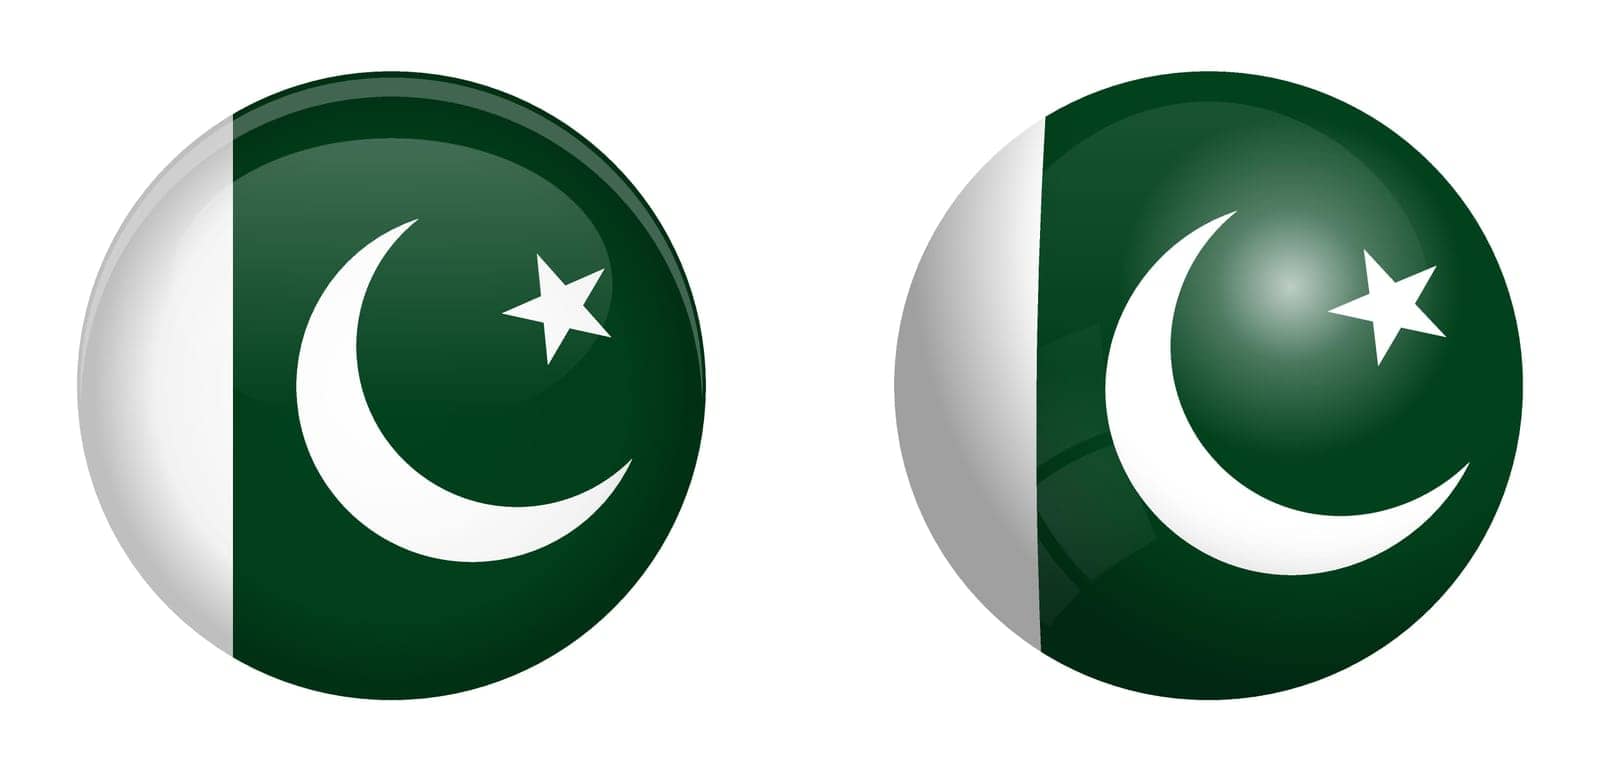 Pakistan flag under 3d dome button and on glossy sphere / ball.